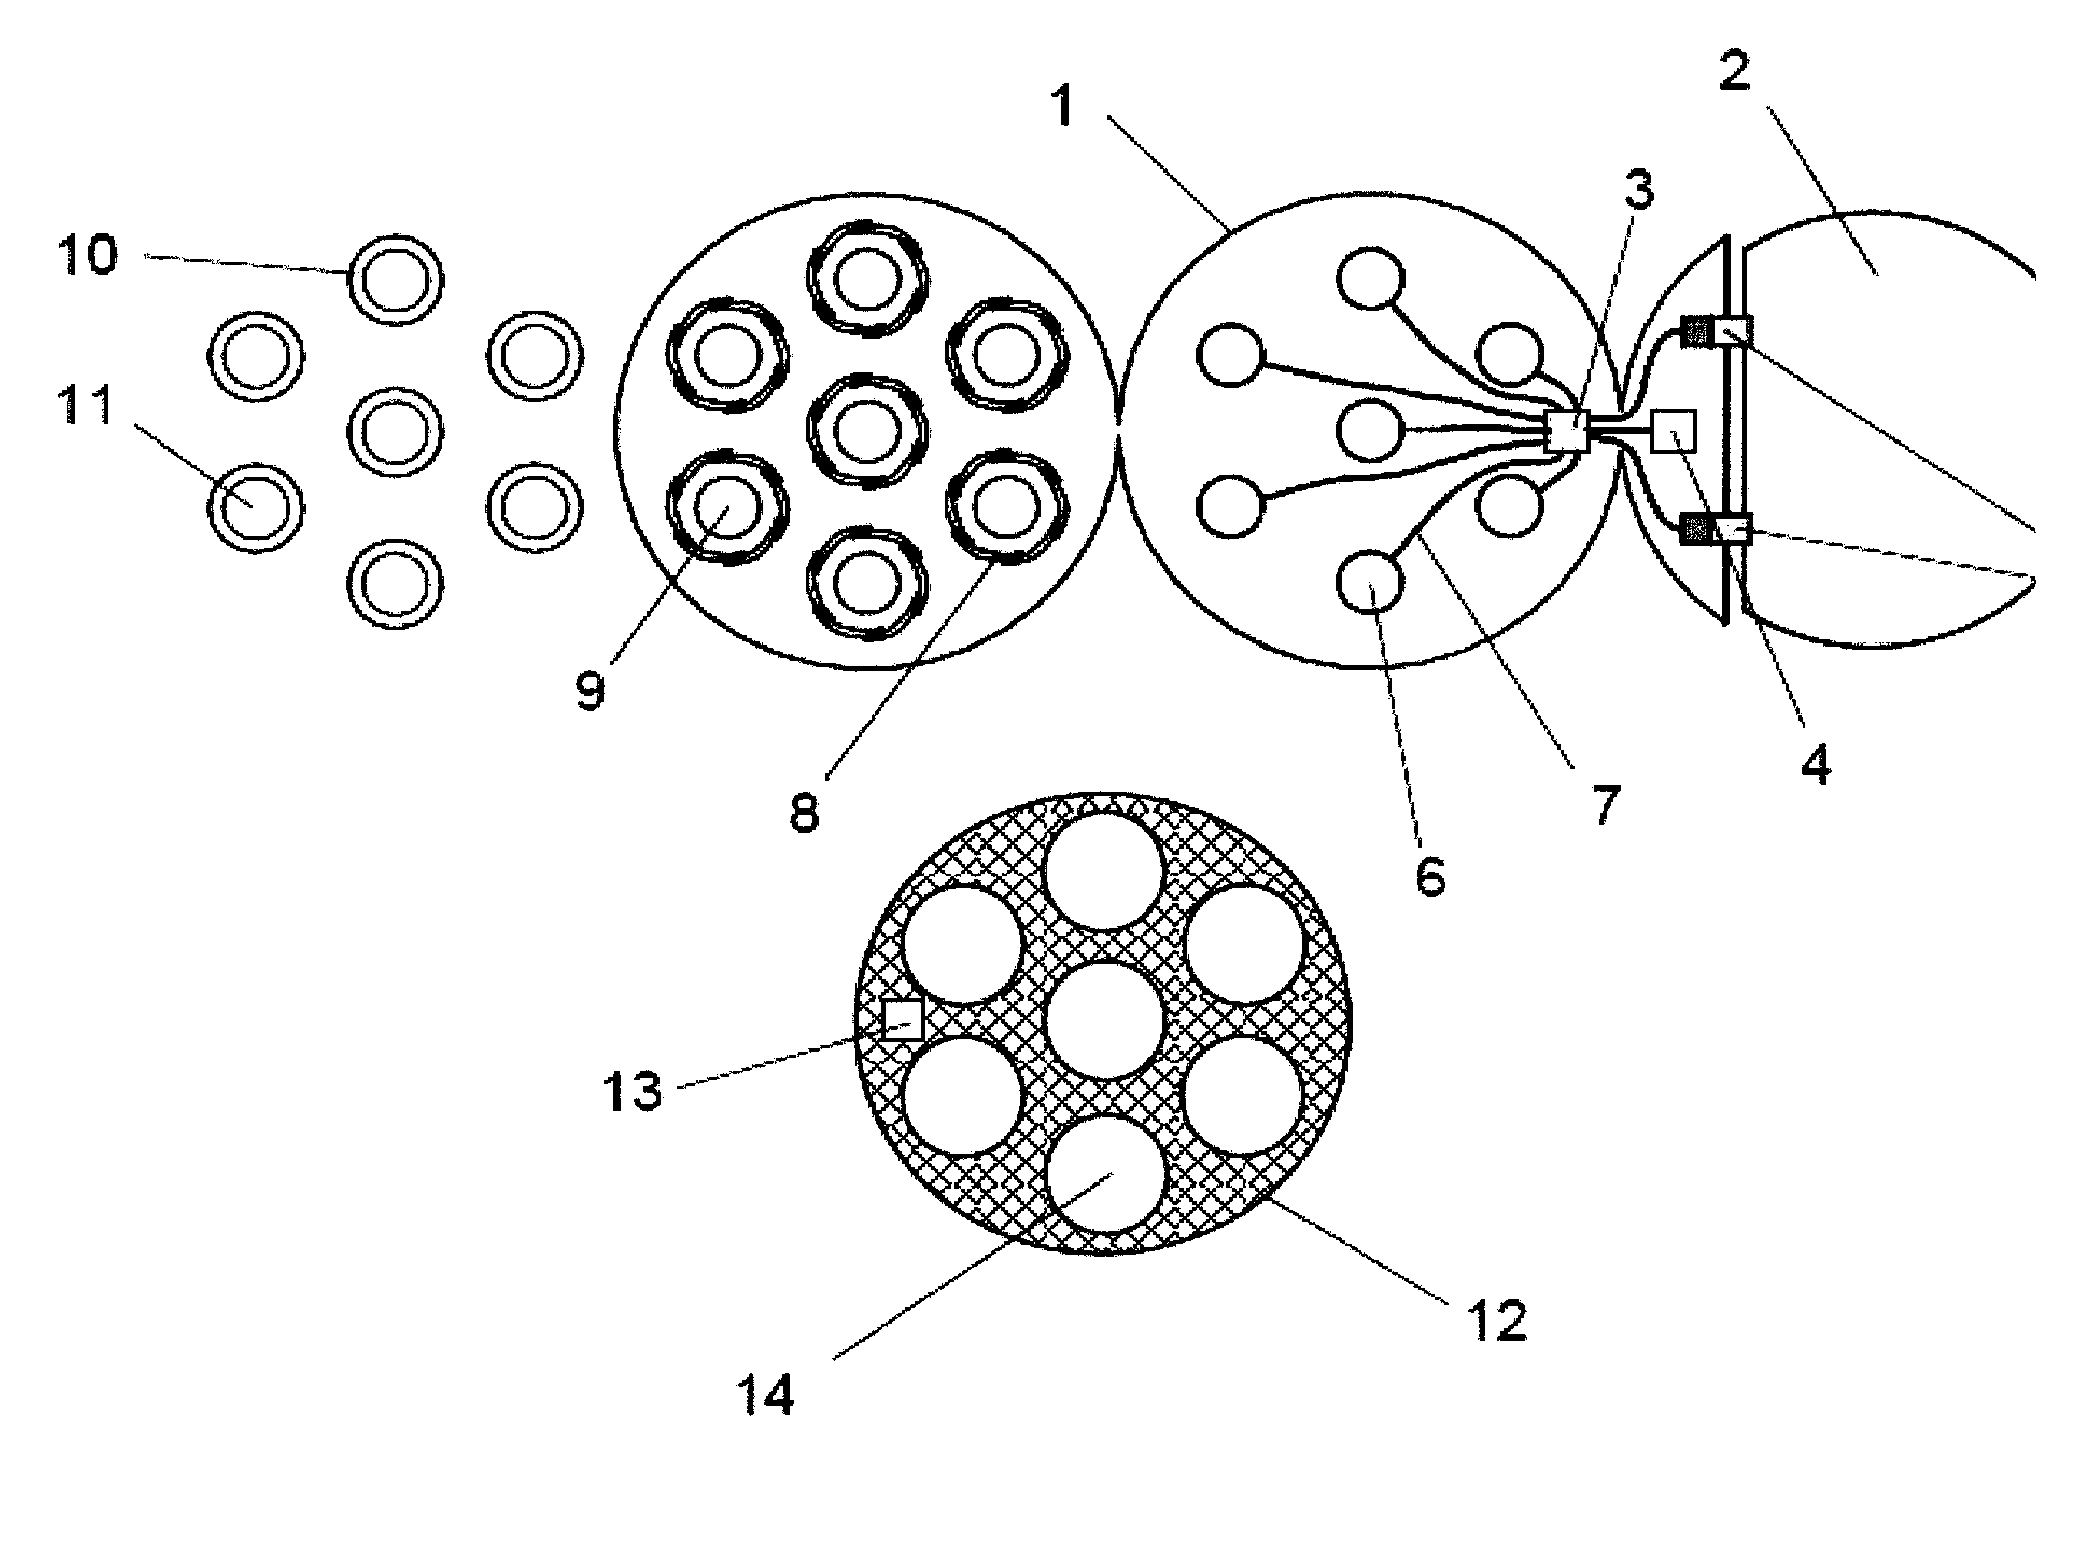 Flexible wireless patch for physiological monitoring and methods of manufacturing the same